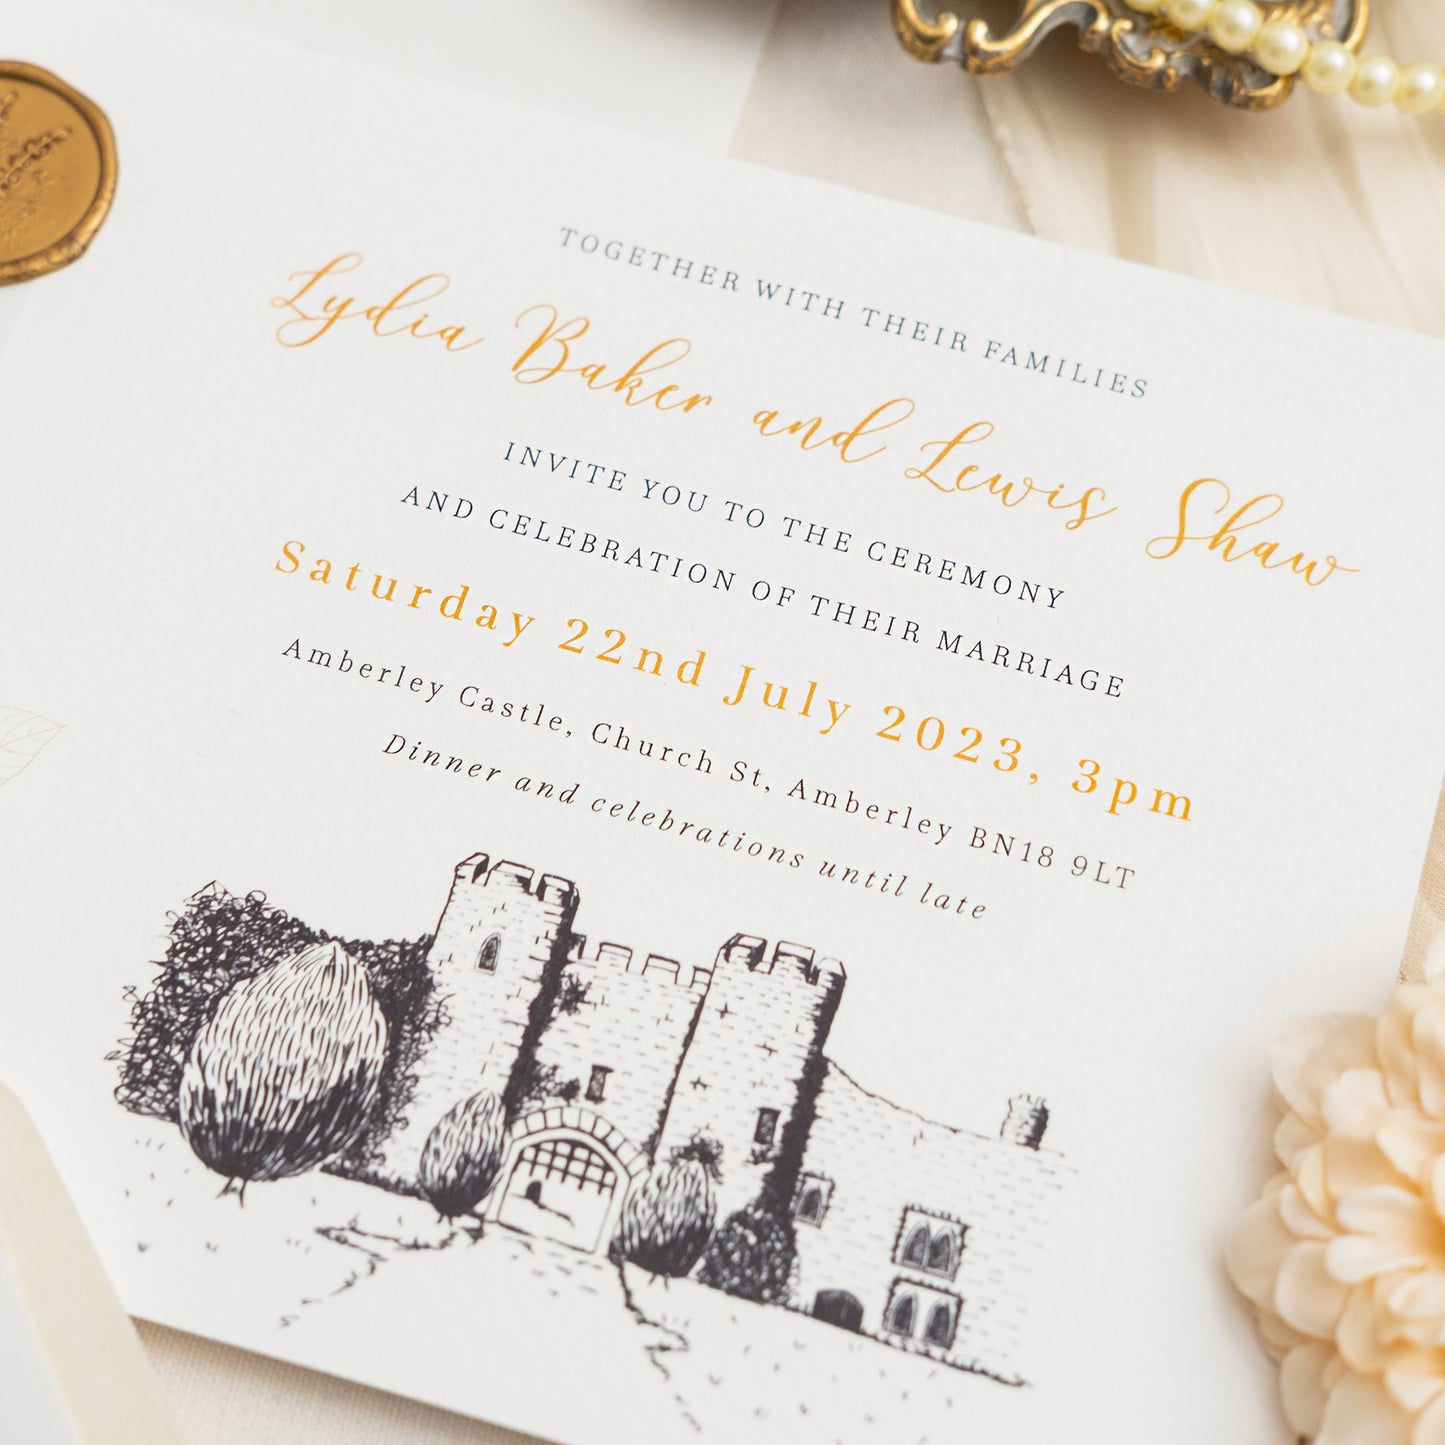 Invitation With Gold Wax Seal And Venue Illustration